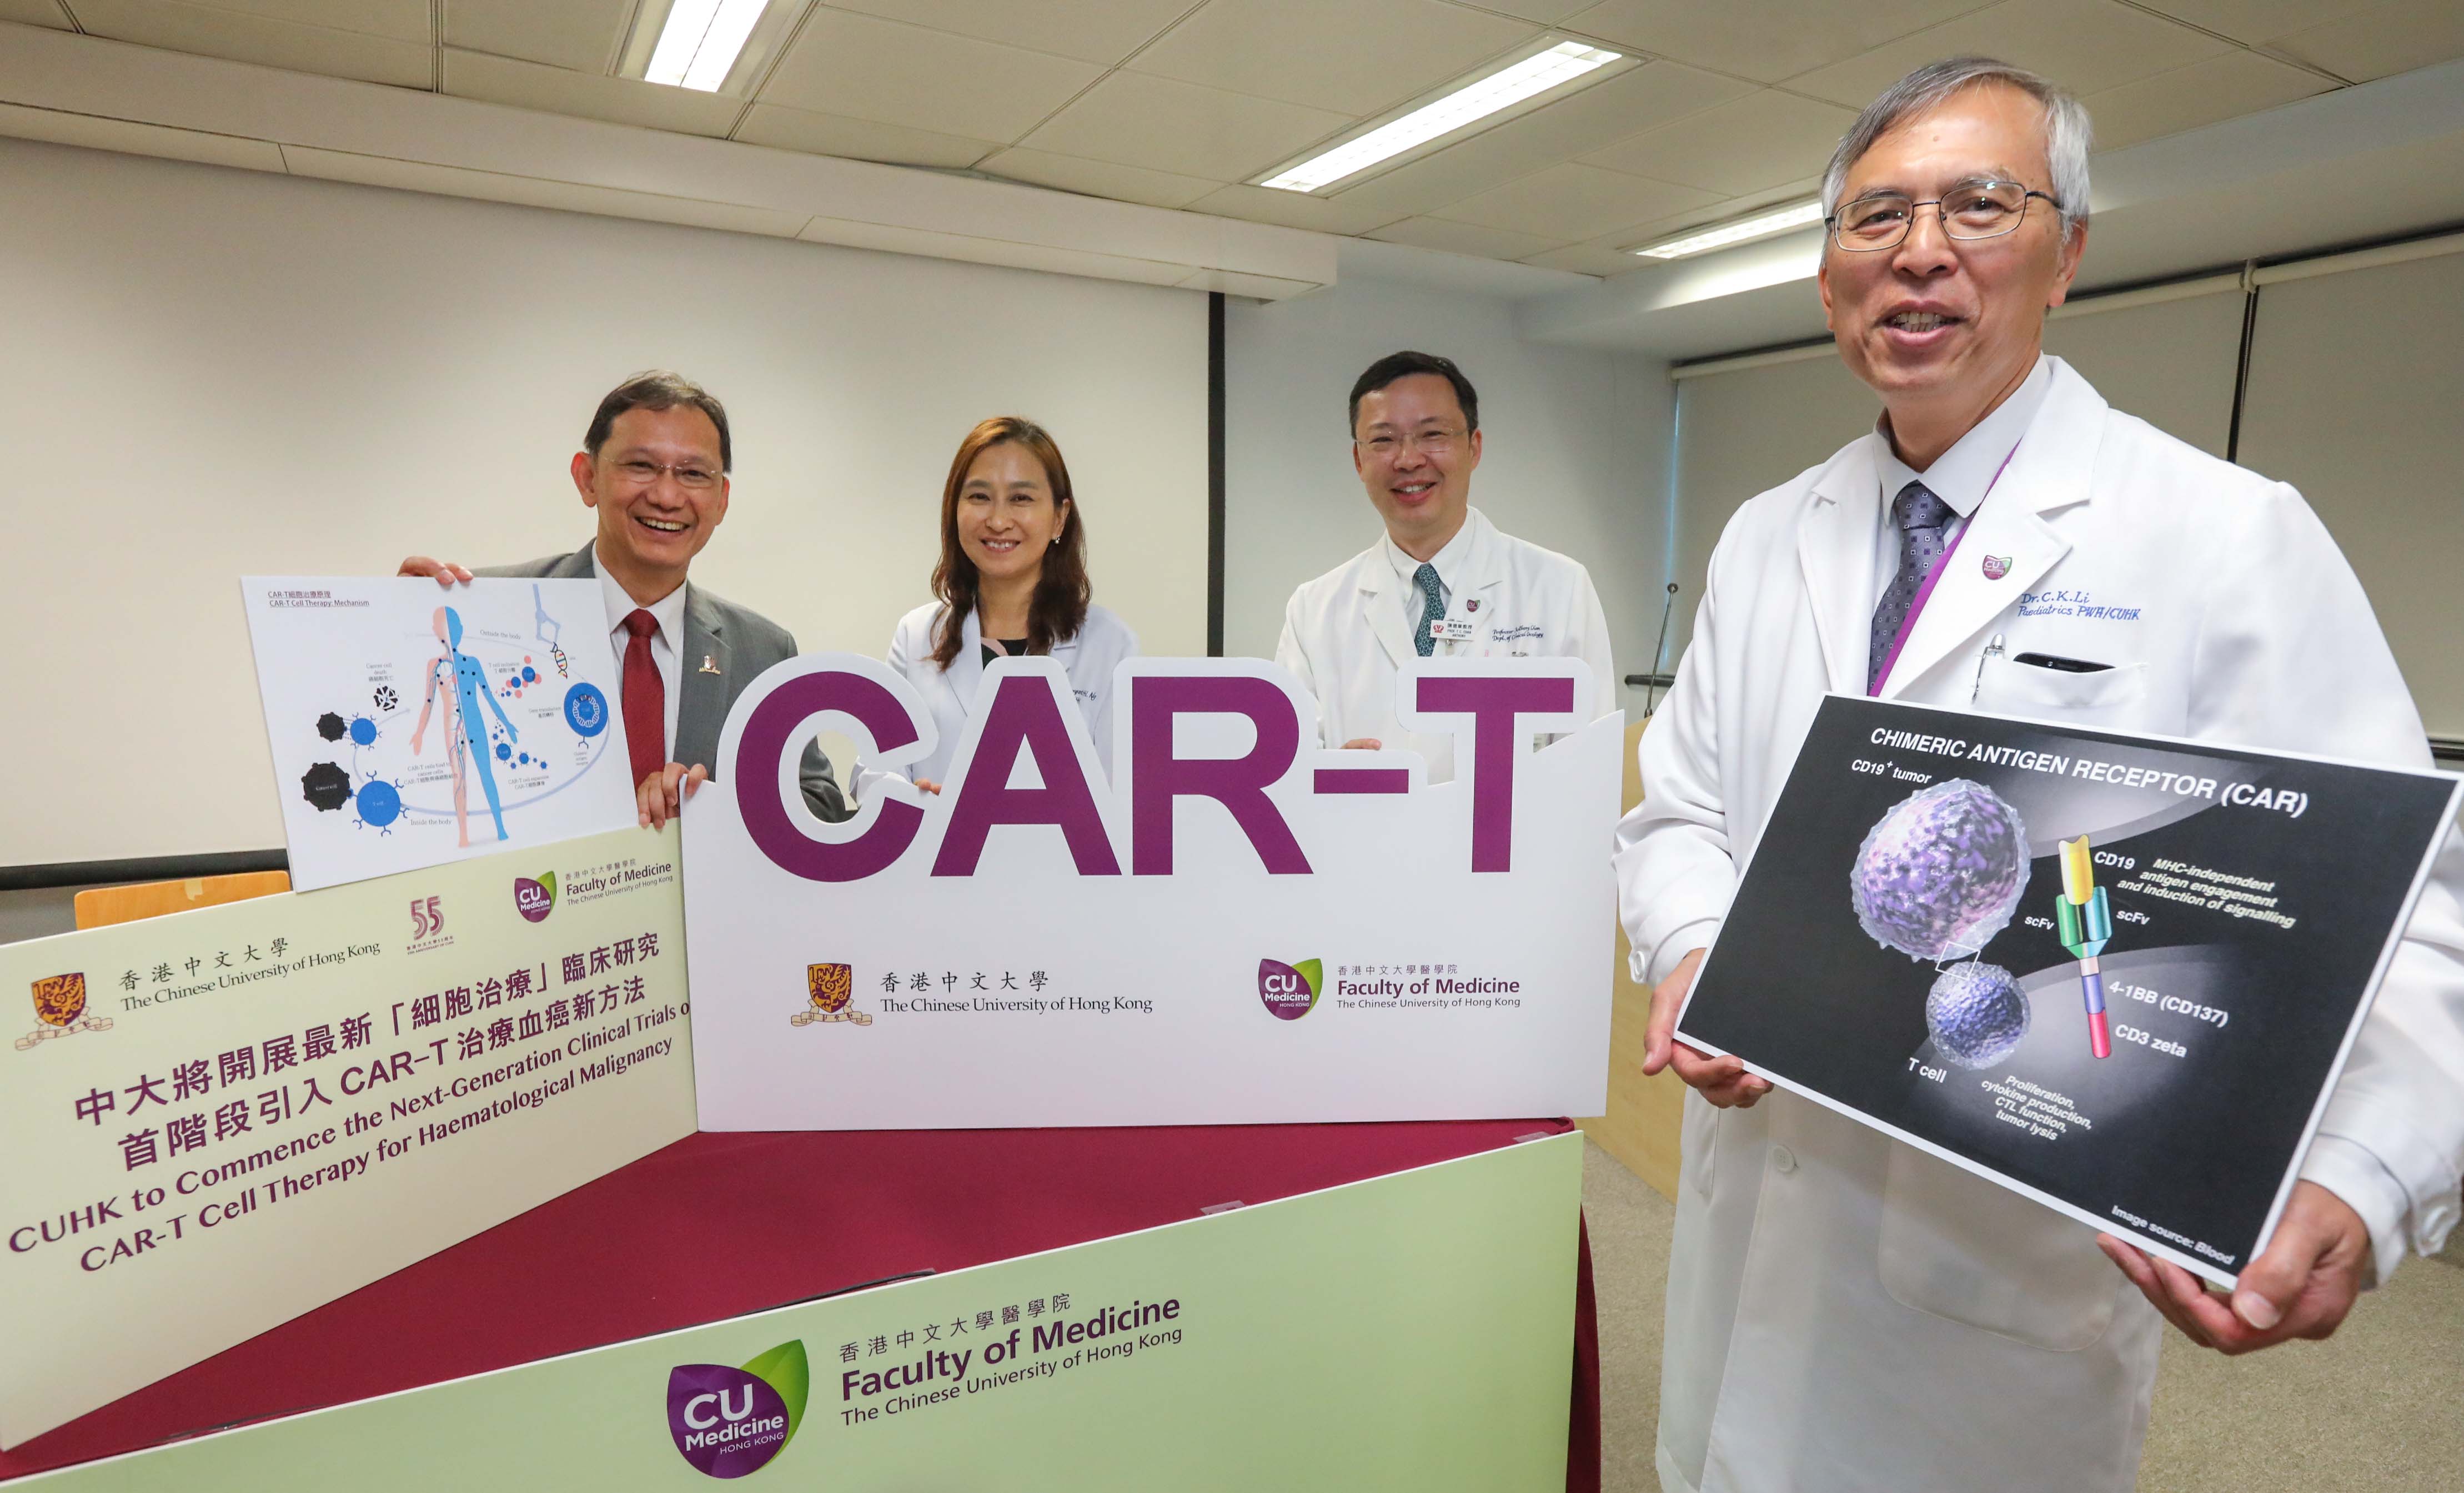 CUHK is working on the preparation of CAR-T cell therapy clinical trial for child and adult patients with leukemia or lymphoma. The research team carries high hope that this next generation therapy will become available in Hong Kong.